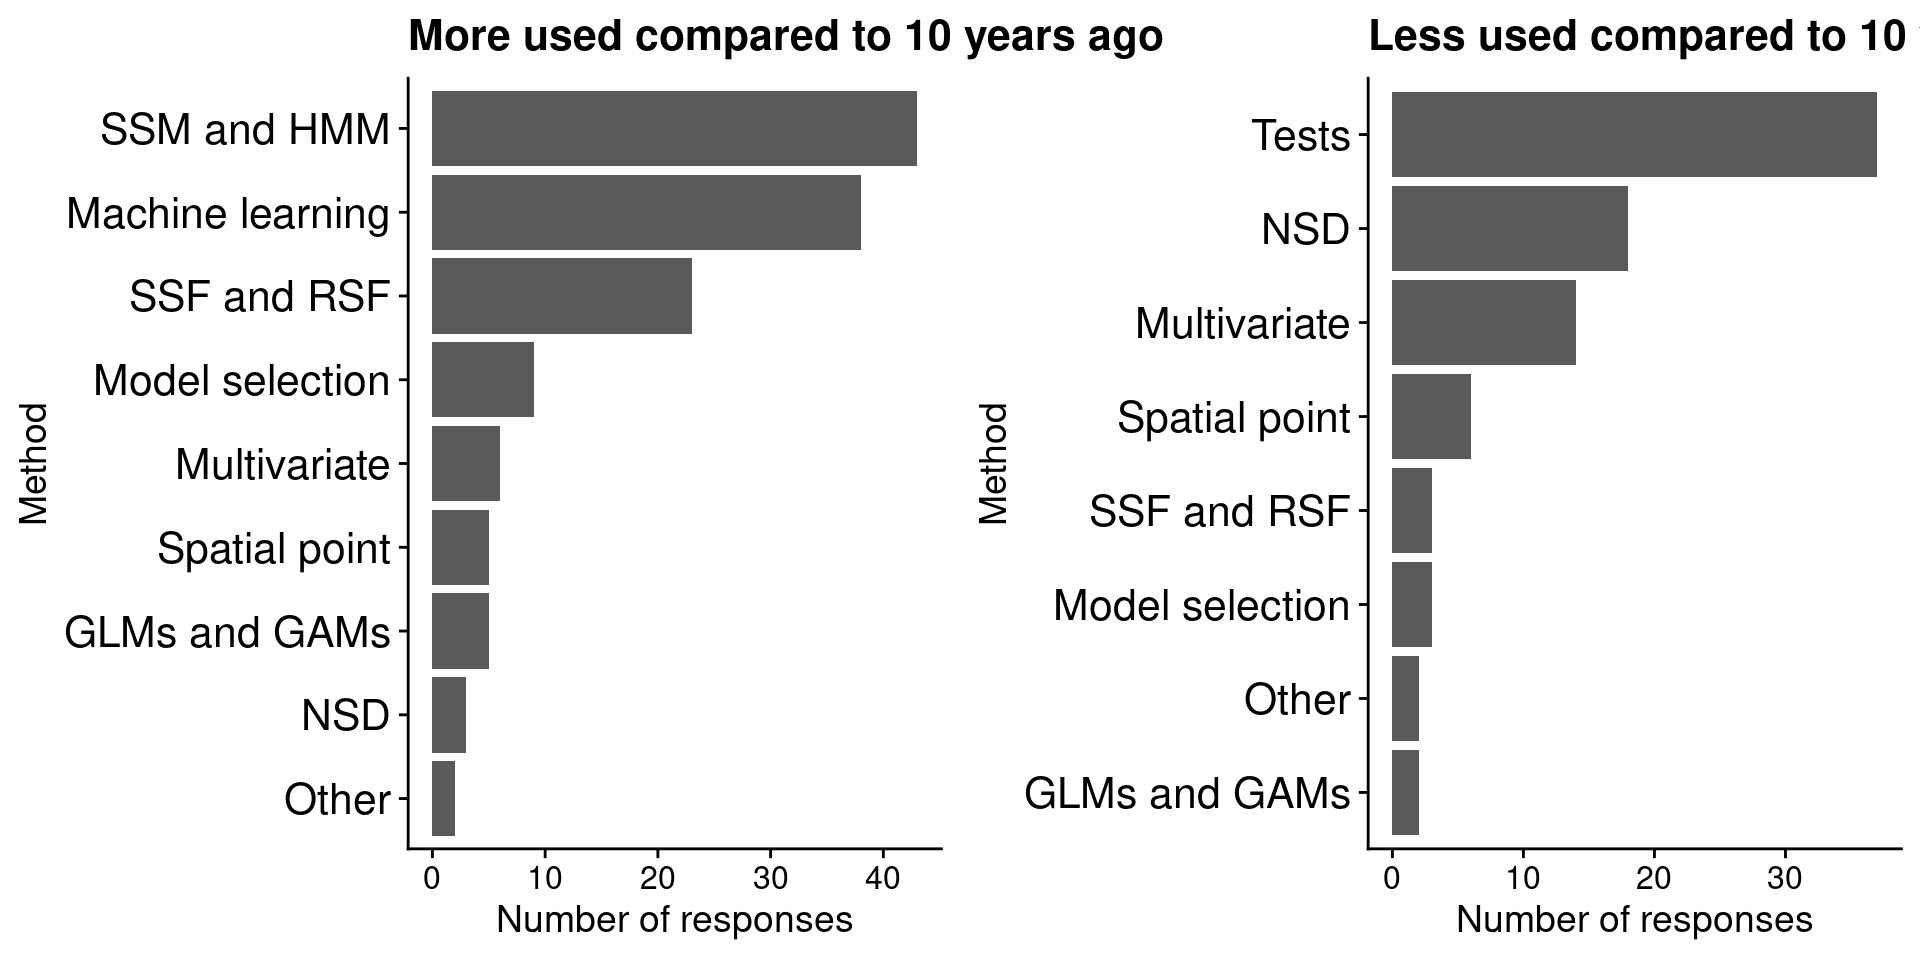 Left: horizontal bar plots indicating participants' votes on which statistical/mathematical methods are more used now compared to ten years ago. In decreasing order of votes: SSM and HMM, machine learning, SSF and RSF, model selection, multivariate, spatial point, GLMs and GAMs, NSD, and other. Right: horizontal bar plots indicating participants' votes on which statistical/mathematical methods are less used now compared to ten years ago. In decreasing order of votes: tests, NSD, multivariate, spatial point, SSF and RSF, model selection, other, and GLMs and GAMs.